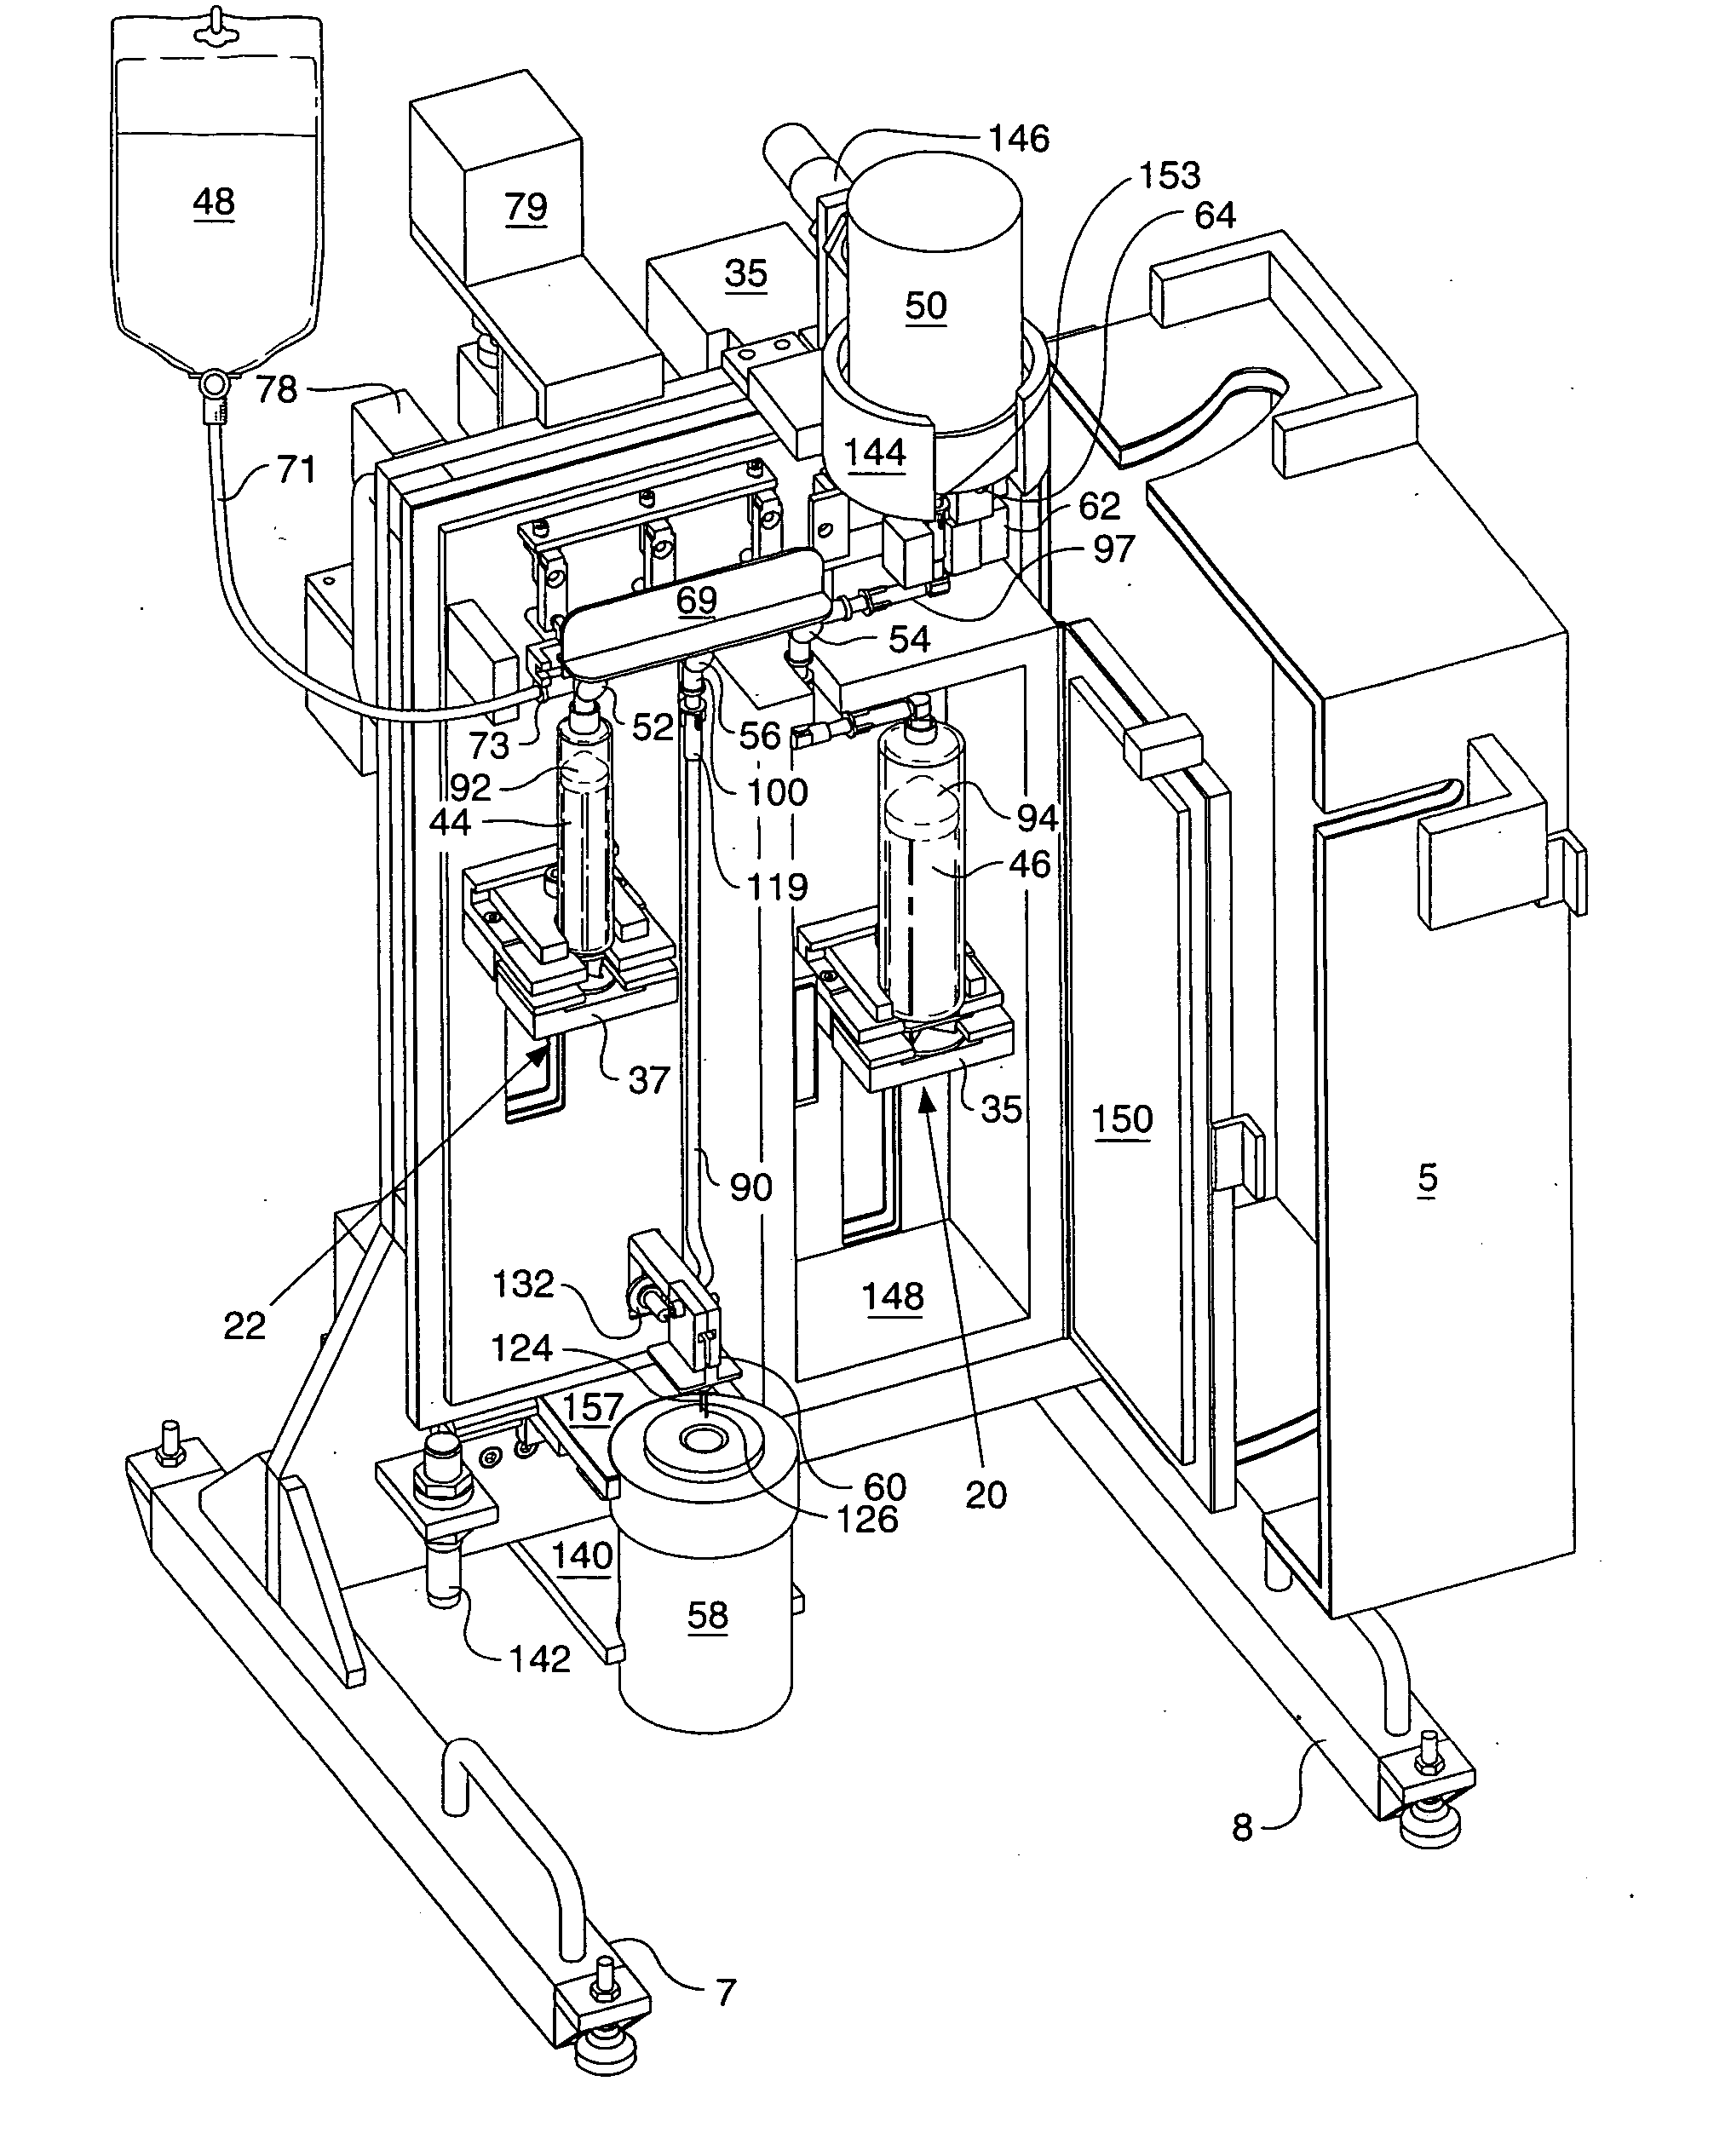 Automated dispensing system and associated method of use